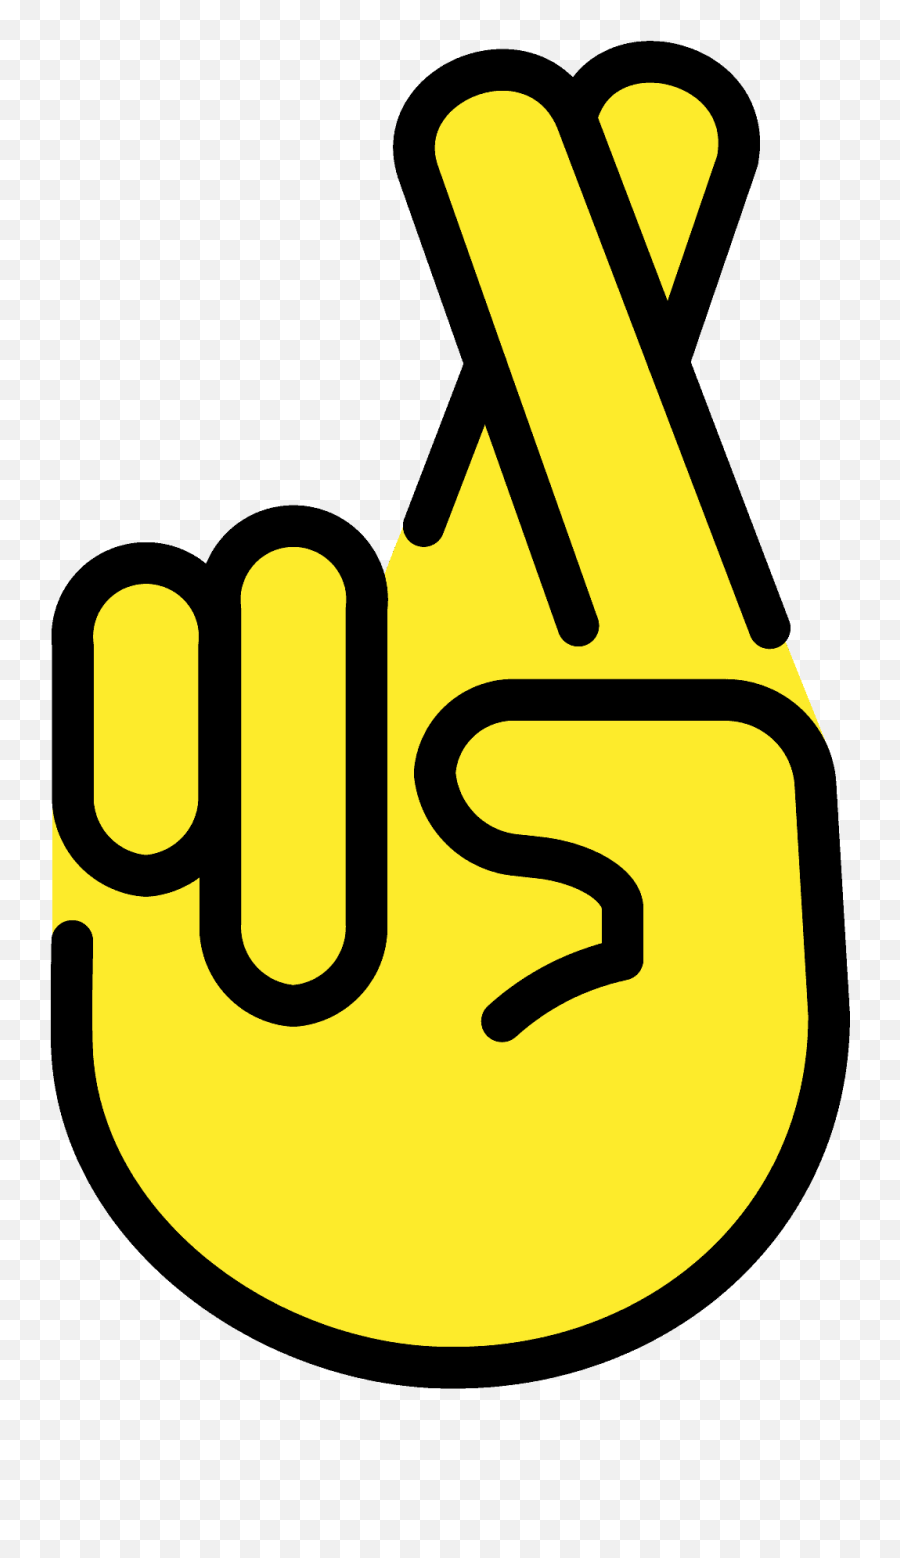 Hand With Index And Middle Fingers Emoji,Fingers Crossed Emoji - Free ...